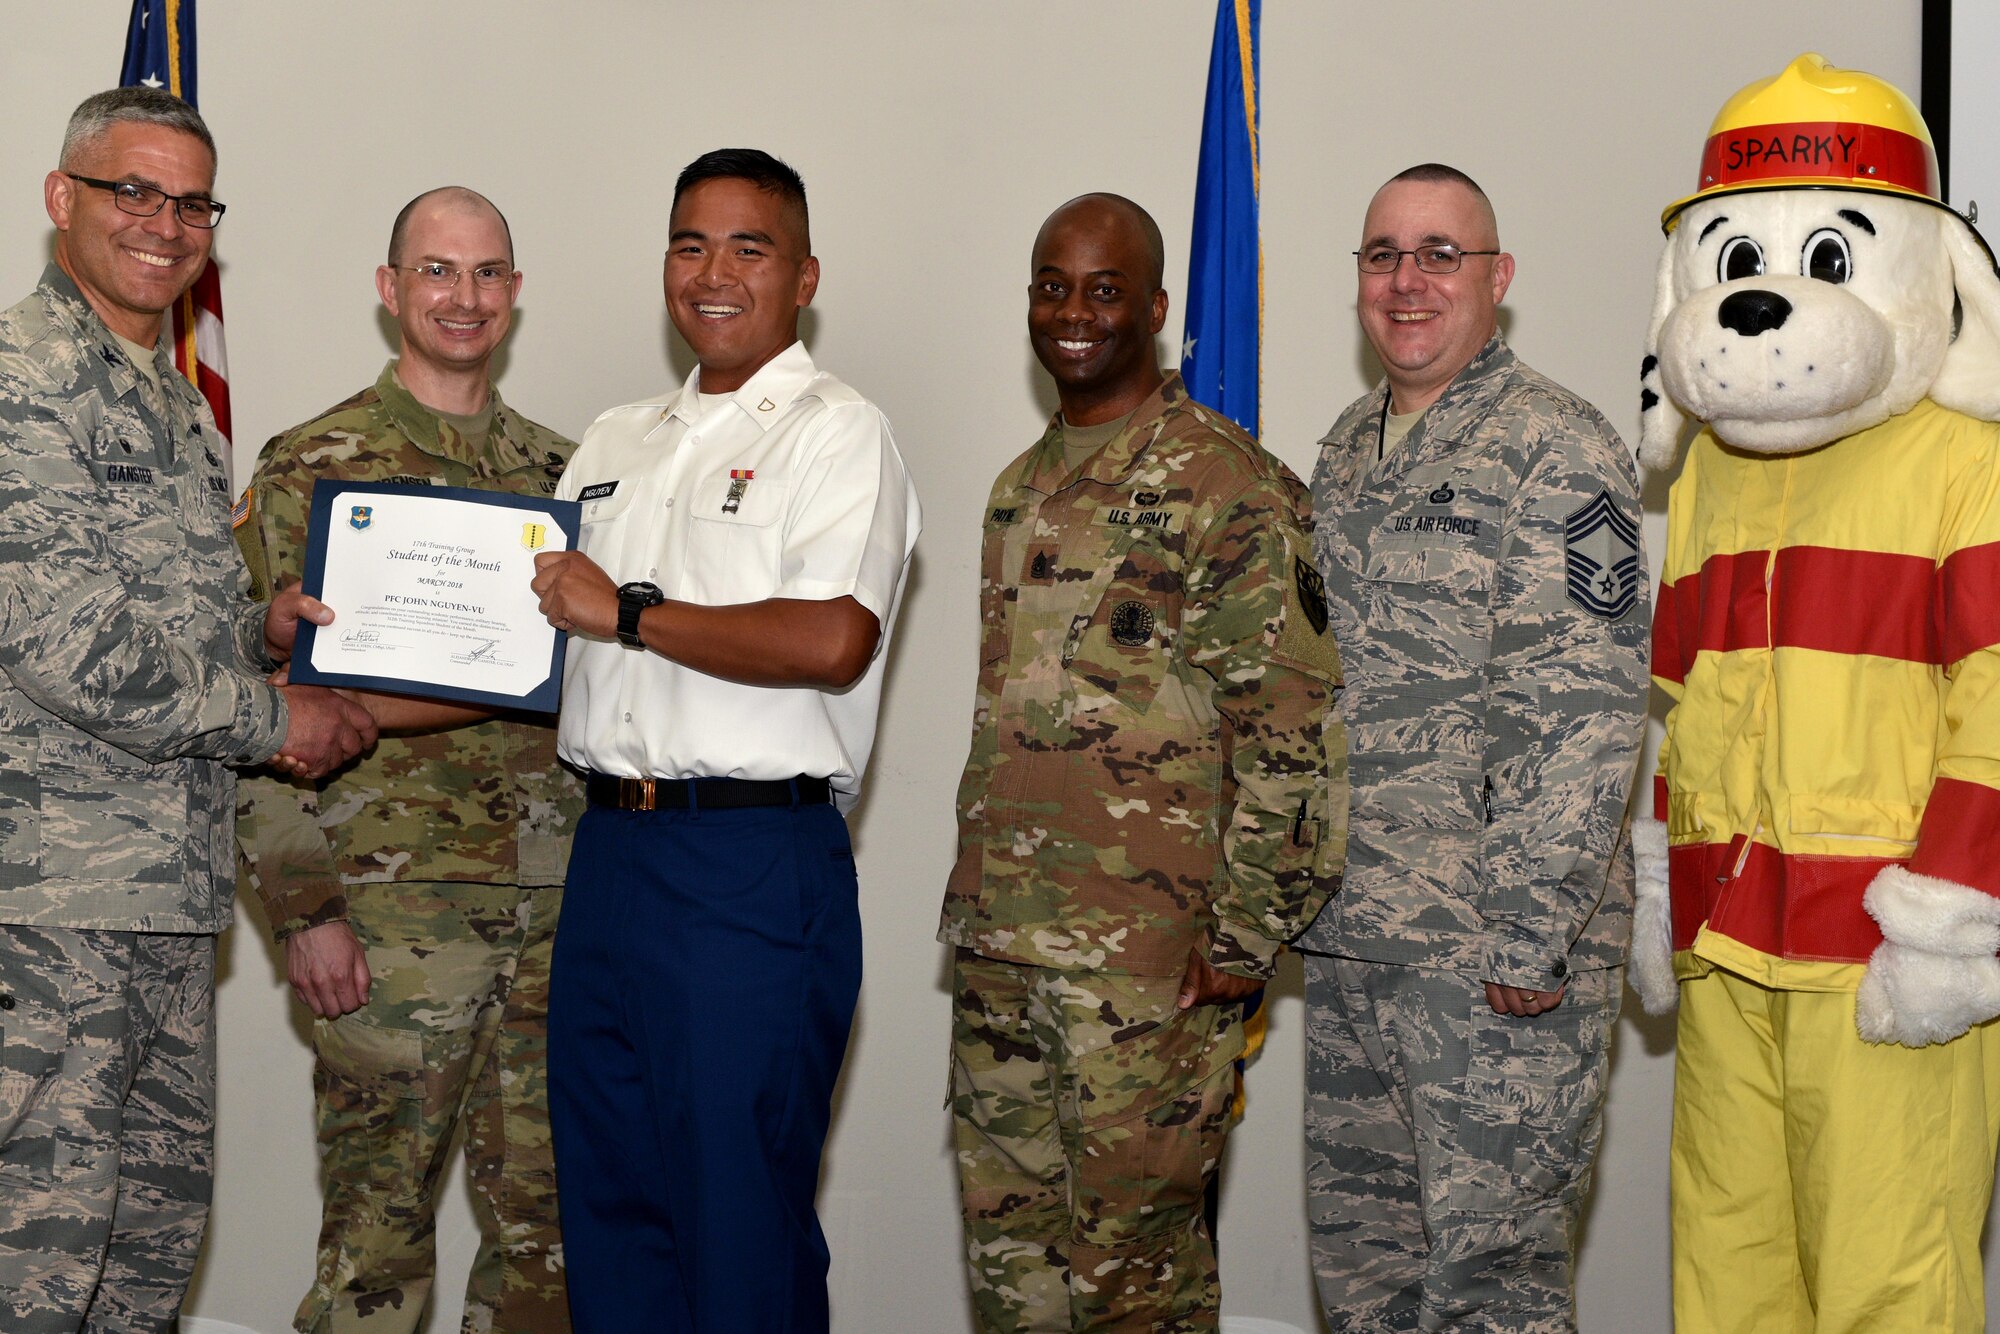 U.S. Air Force Col. Alex Ganster, 17th Training Group commander, and Chief Master Sgt. Daniel Stein, 17th TRG superintendent, present the 312th Training Squadron Student of the Month certificate to U.S. Army Private 1st Class John Nguyen-Vu, 312th TRS trainee, in the Event Center on Goodfellow Air Force Base, Texas, April 6, 2018.  The 312th TRS’s mission is to provide Department of Defense and international customers with mission ready fire protection and special instruments graduates and provide mission support for the Air Force Technical Applications Center. (U.S. Air Force photo by Senior Airman Randall Moose/Released)